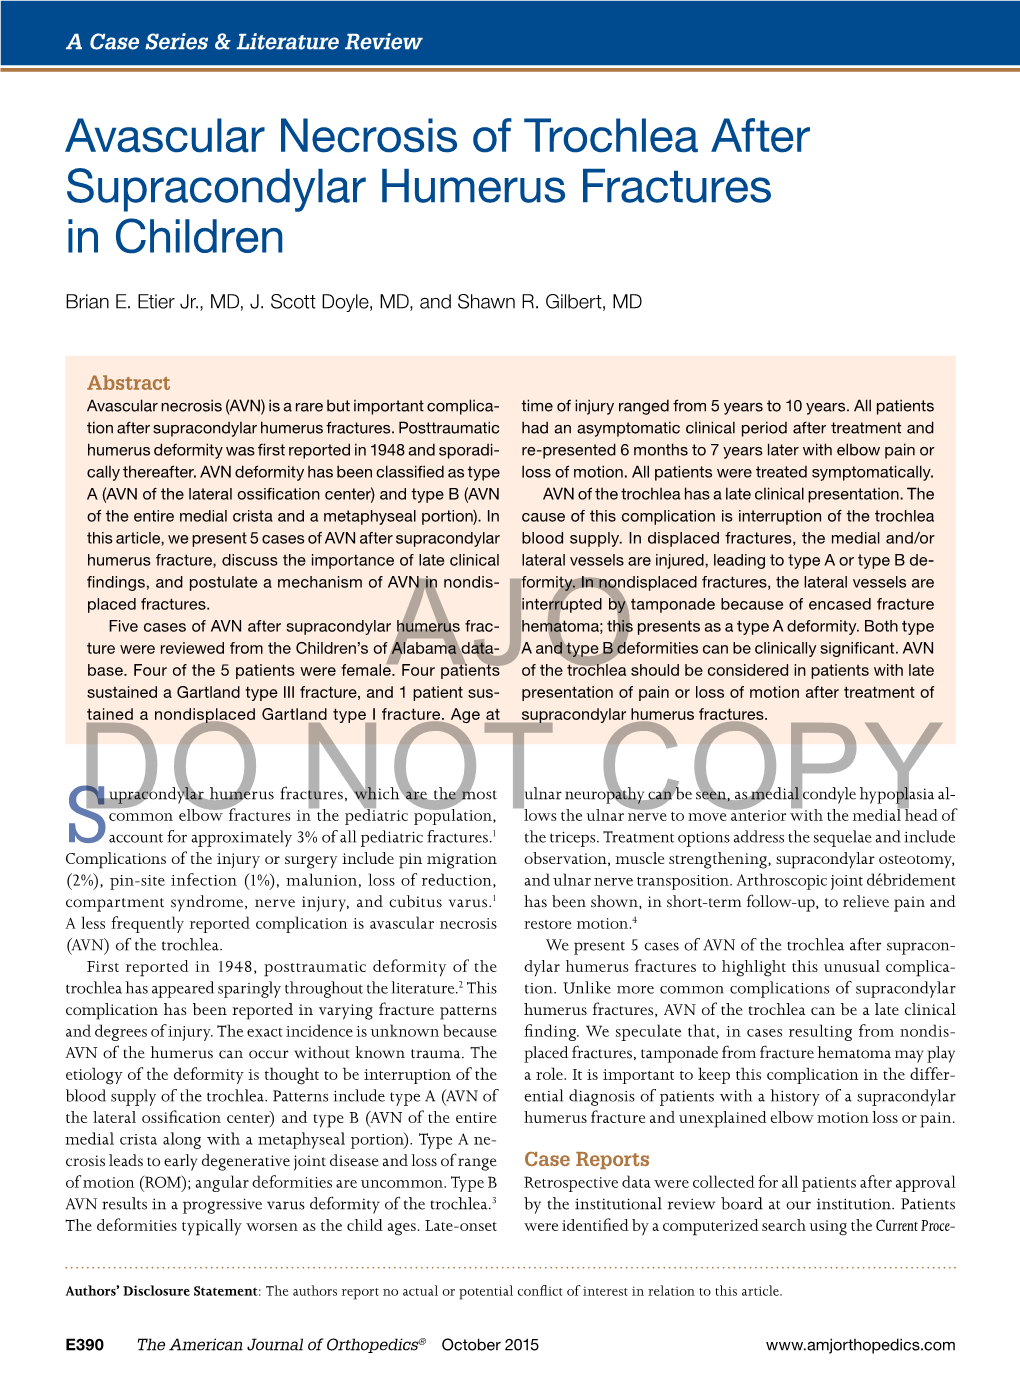 Avascular Necrosis of Trochlea After Supracondylar Humerus Fractures in Children